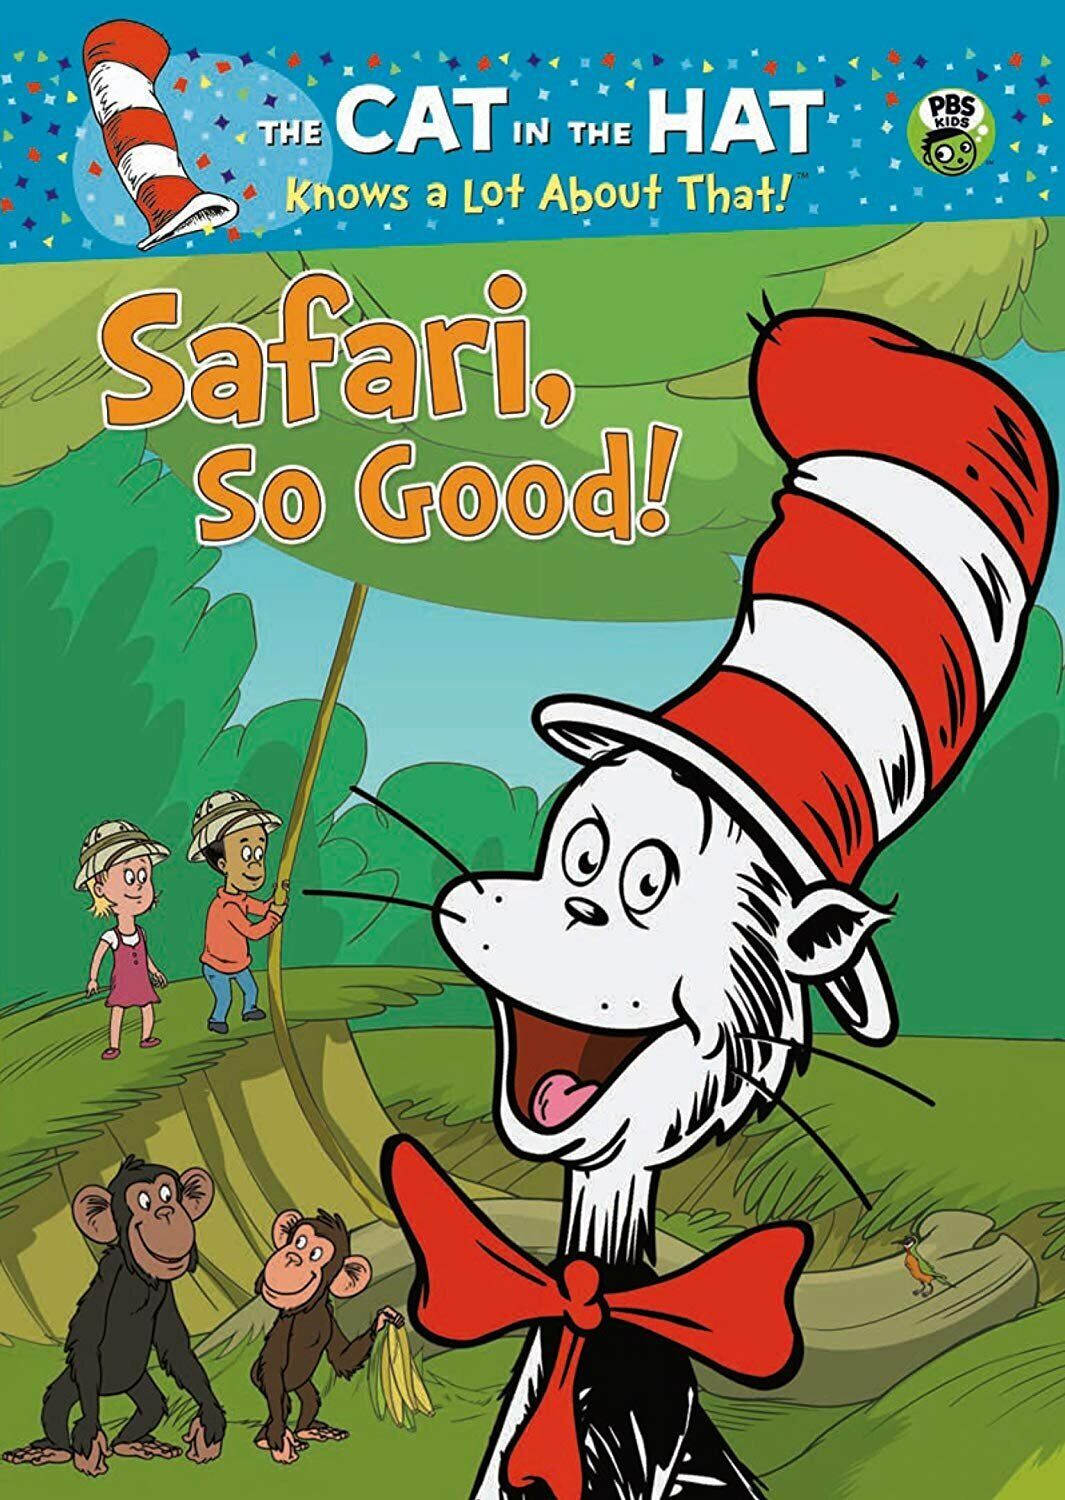 Cat in the Hat Knows a Lot About That!: Safari So Good DVD